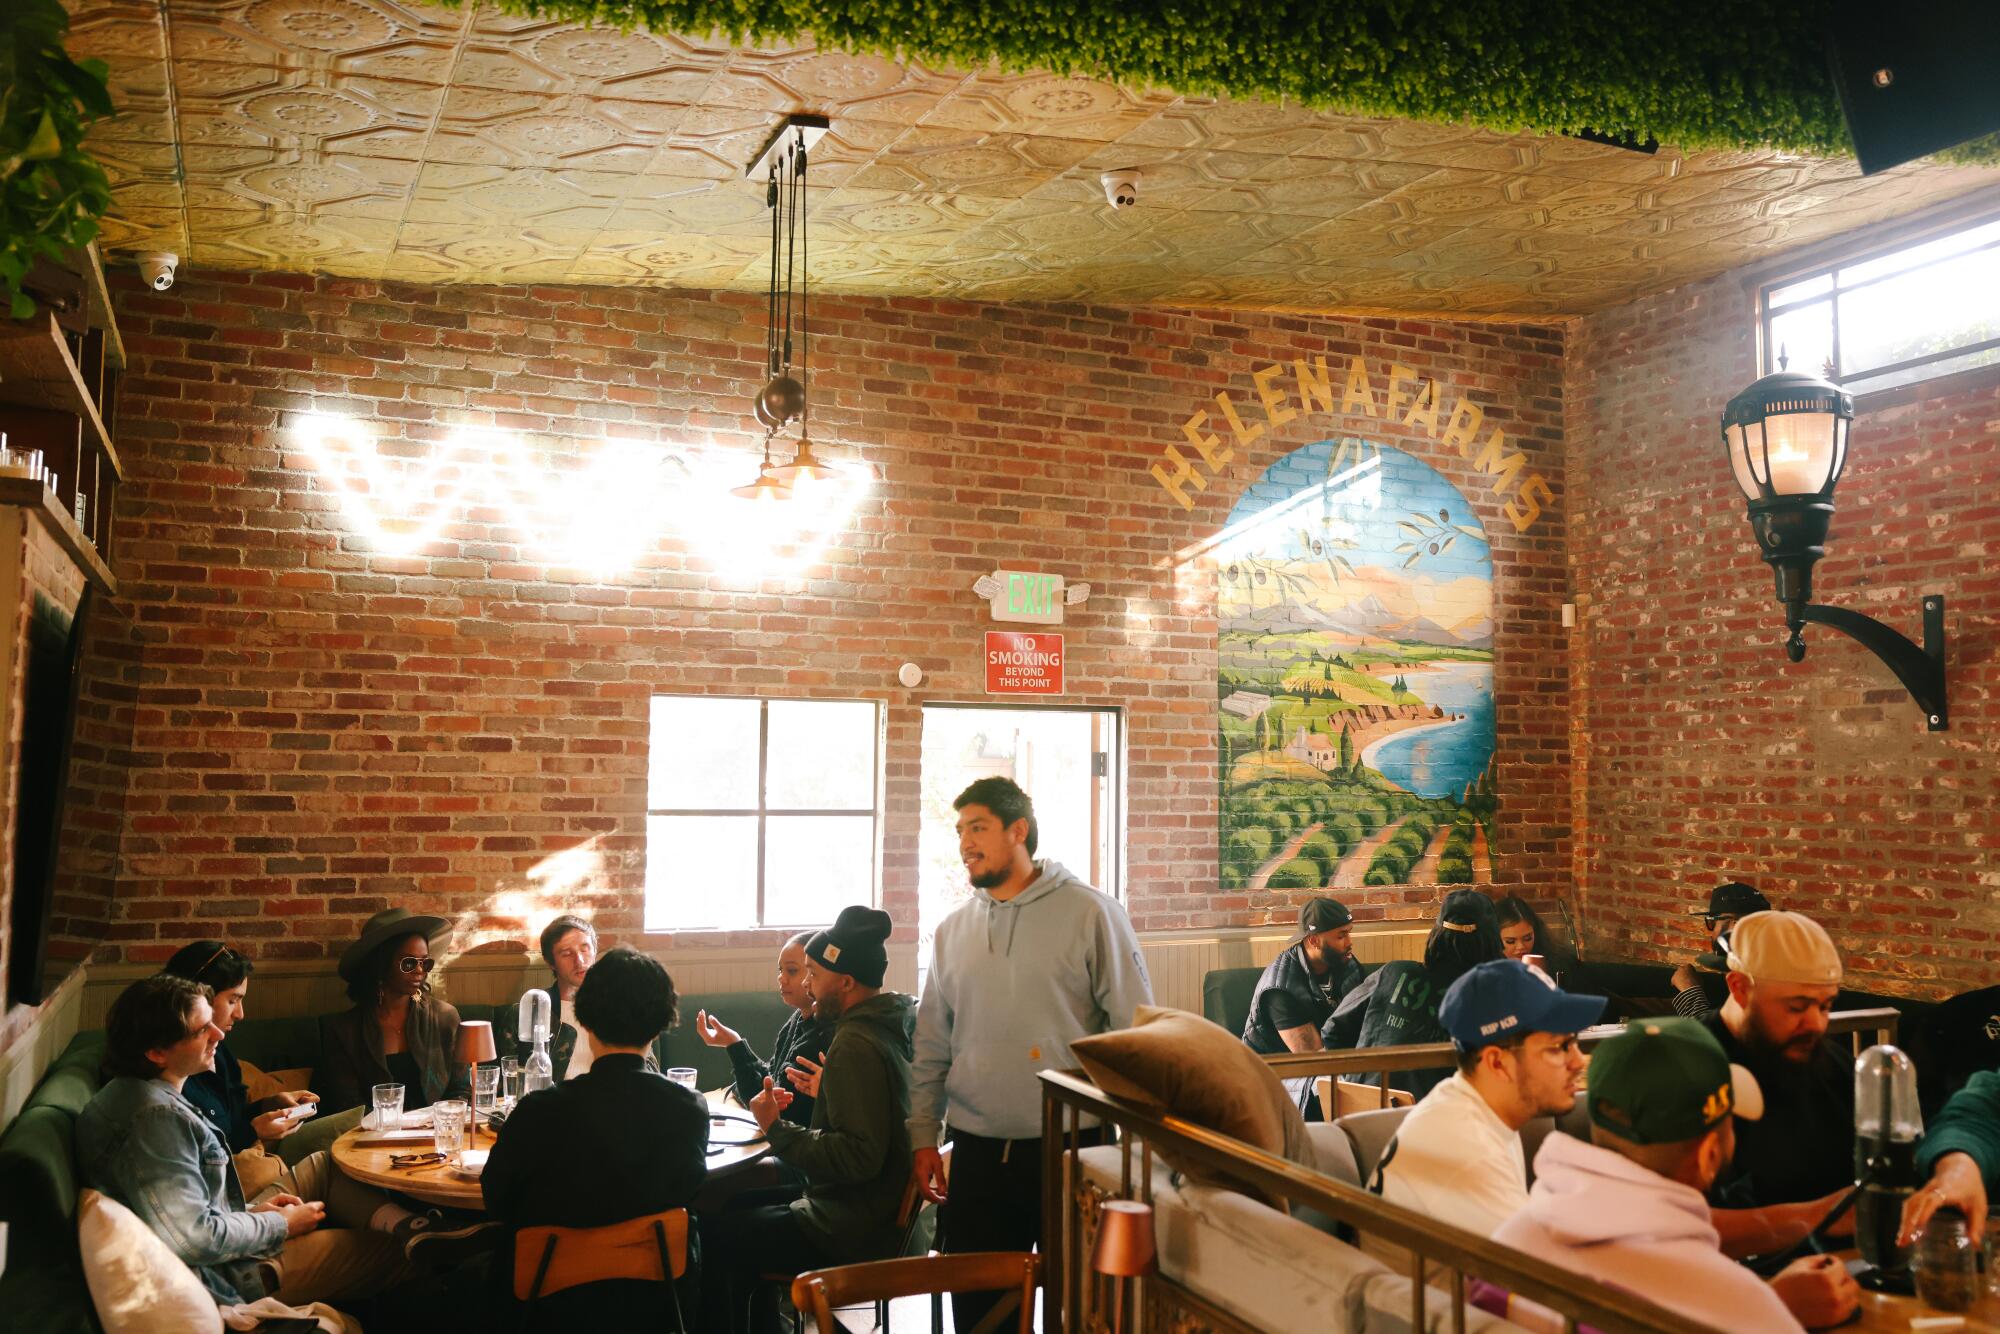 People sitting in a restaurant-like space with brick walls and cannabis-brand art.